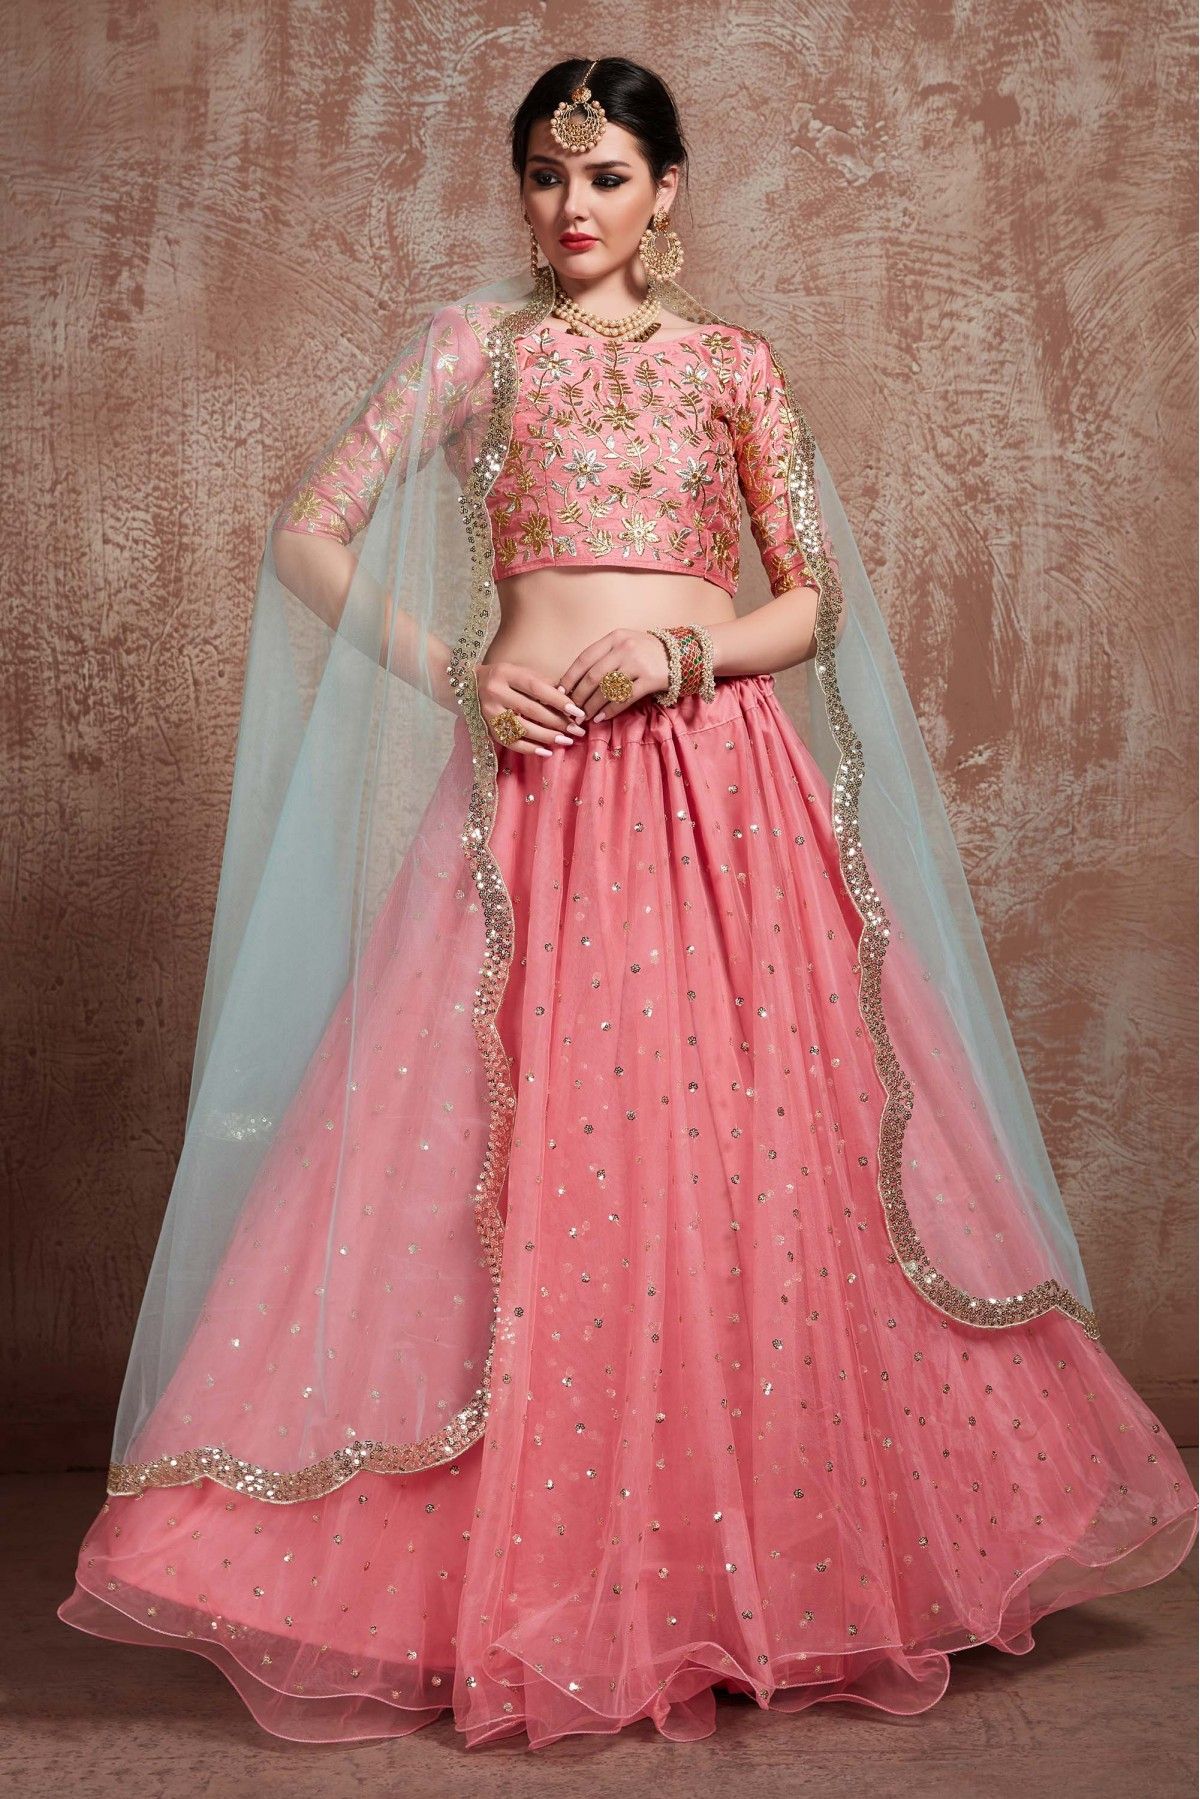 NineColours: Treat Yourself with Exquisite 'Made to Order' Lehenga Choli😍  | Milled